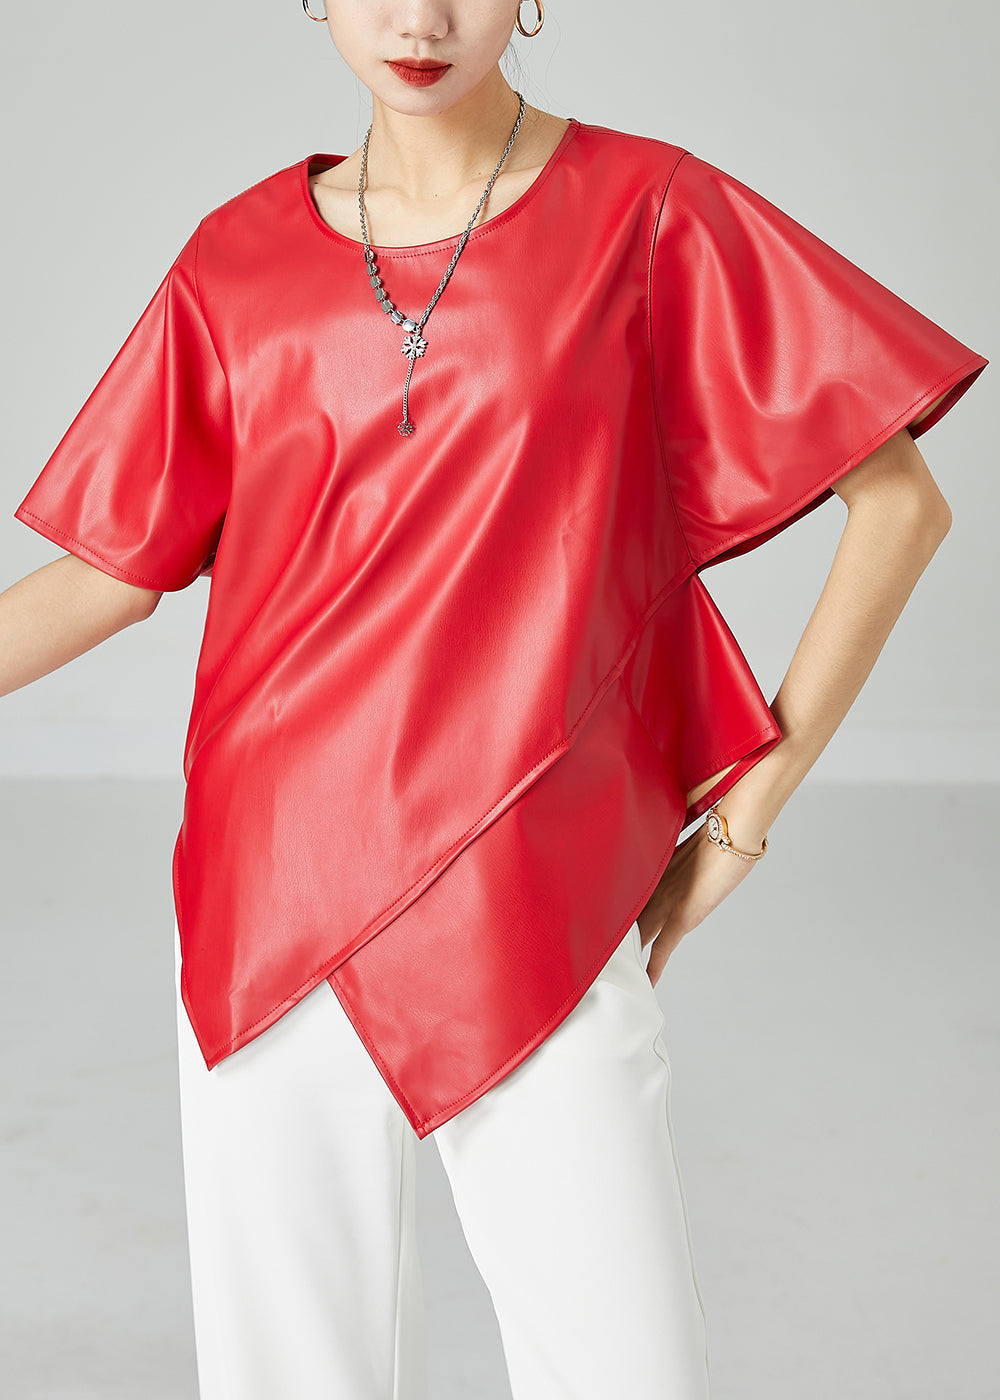 Red Patchwork Leather Tanks Asymmetrical Design Short Sleeve LY2415 - fabuloryshop